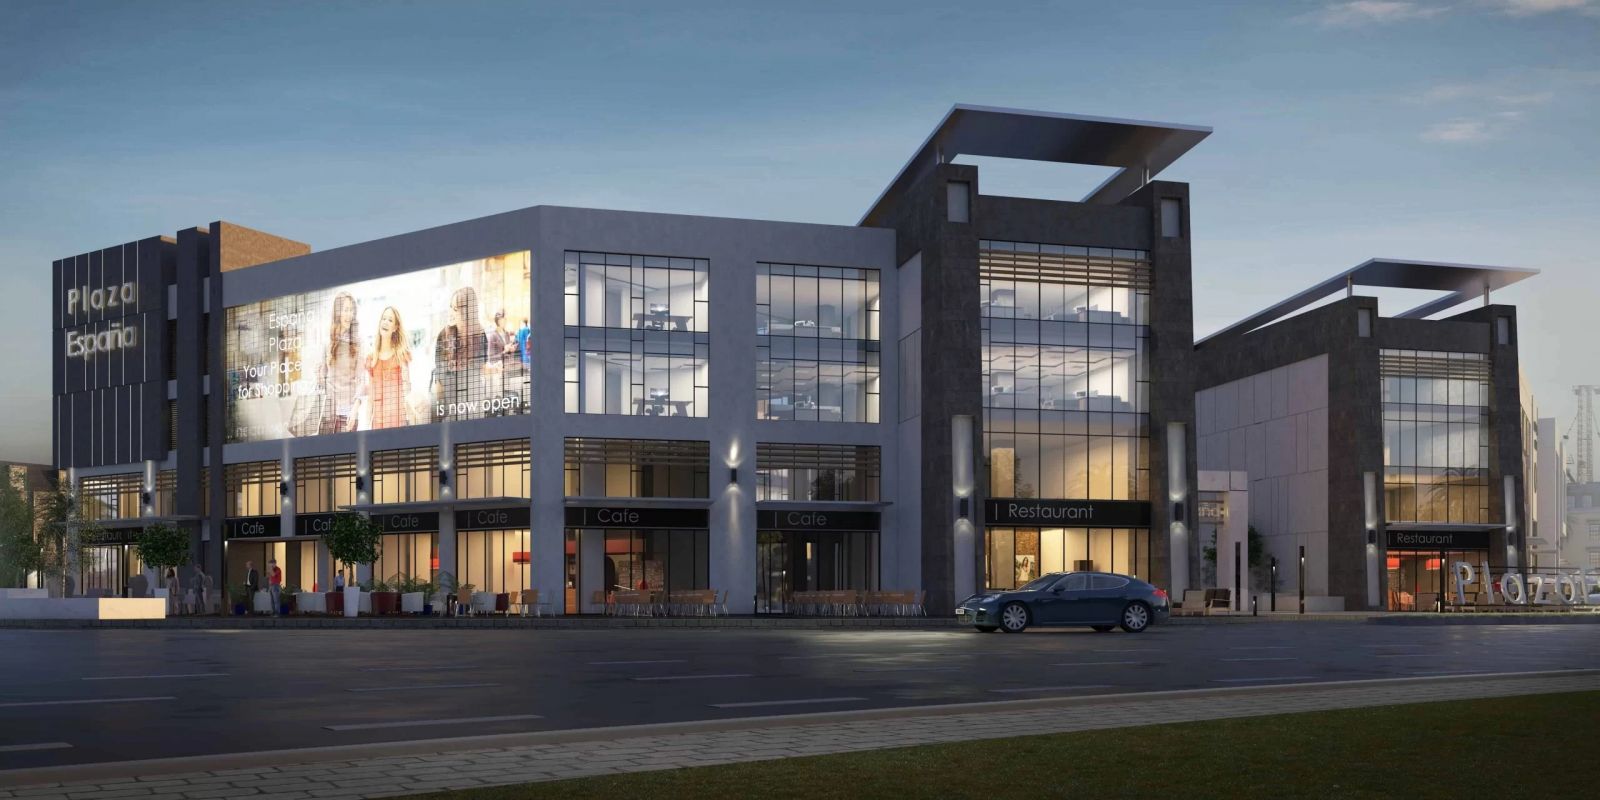 With an area of 104 meters, offices for sale in Plaza Espana Mall project